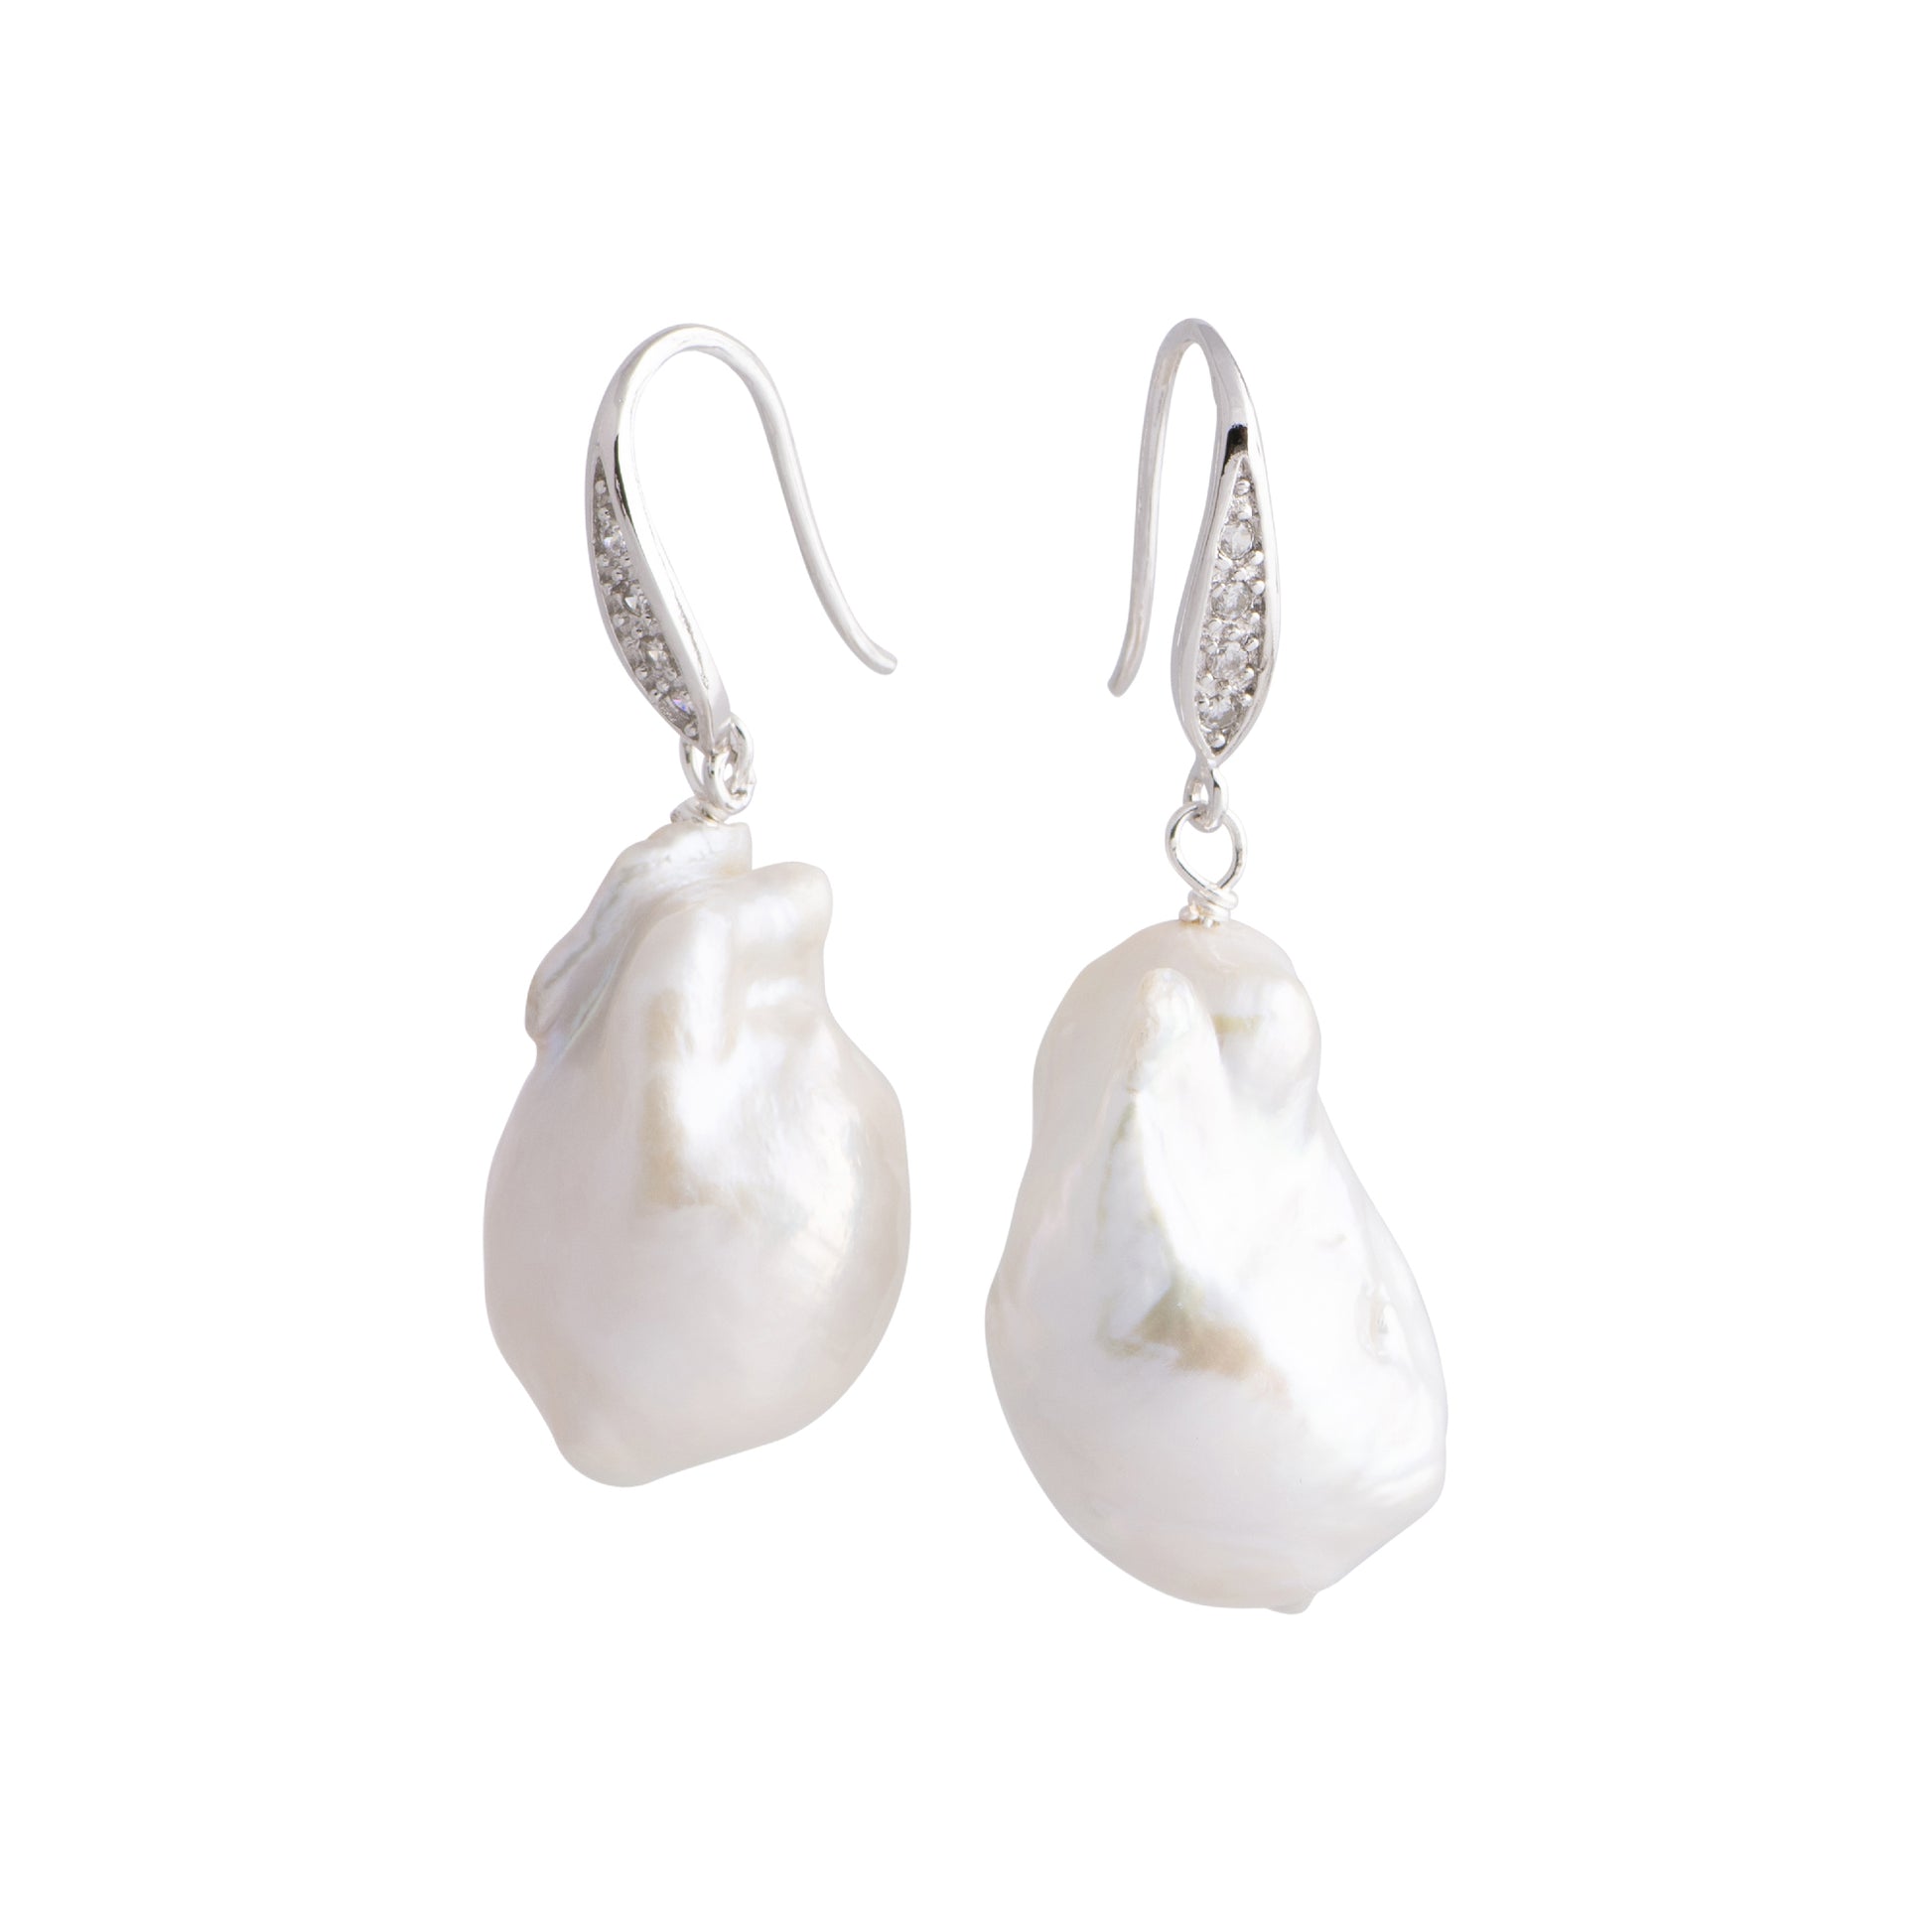 Amosa - Silver crystal and pearl drop earrings (White pearls)